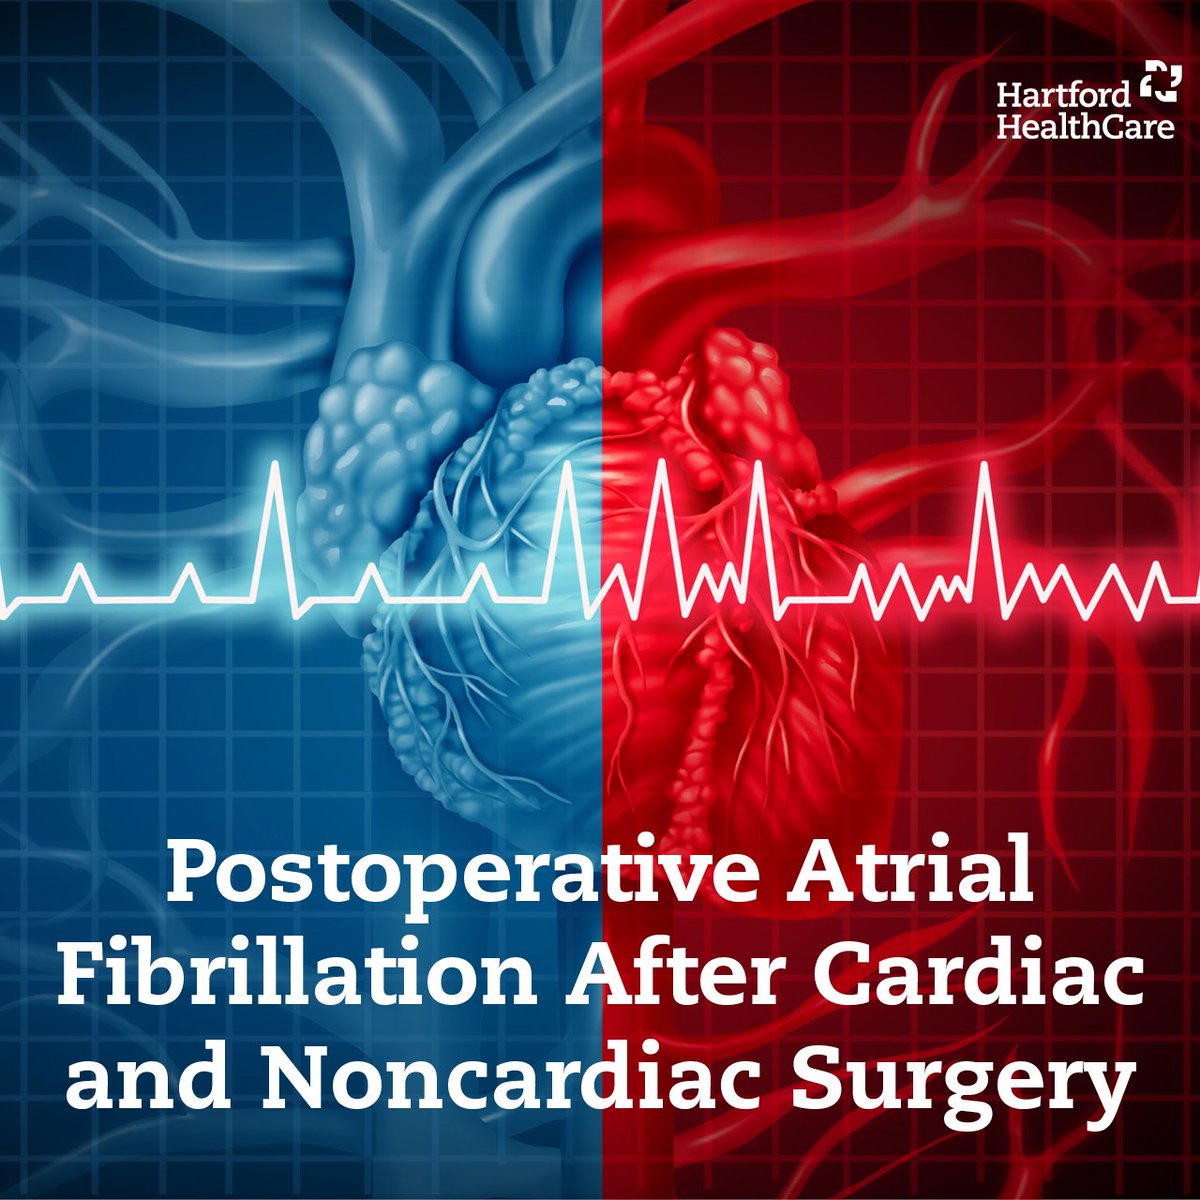 We would like to invite cardiologist and electrophysiologist in a short survey (<5 mins) study to understand the trend of managing patients with postoperative atrial fibrillation on an outpatient basis. Please take a moment to complete & share. Thank you. redcap.hhchealth.org/surveys/?s=3DK…